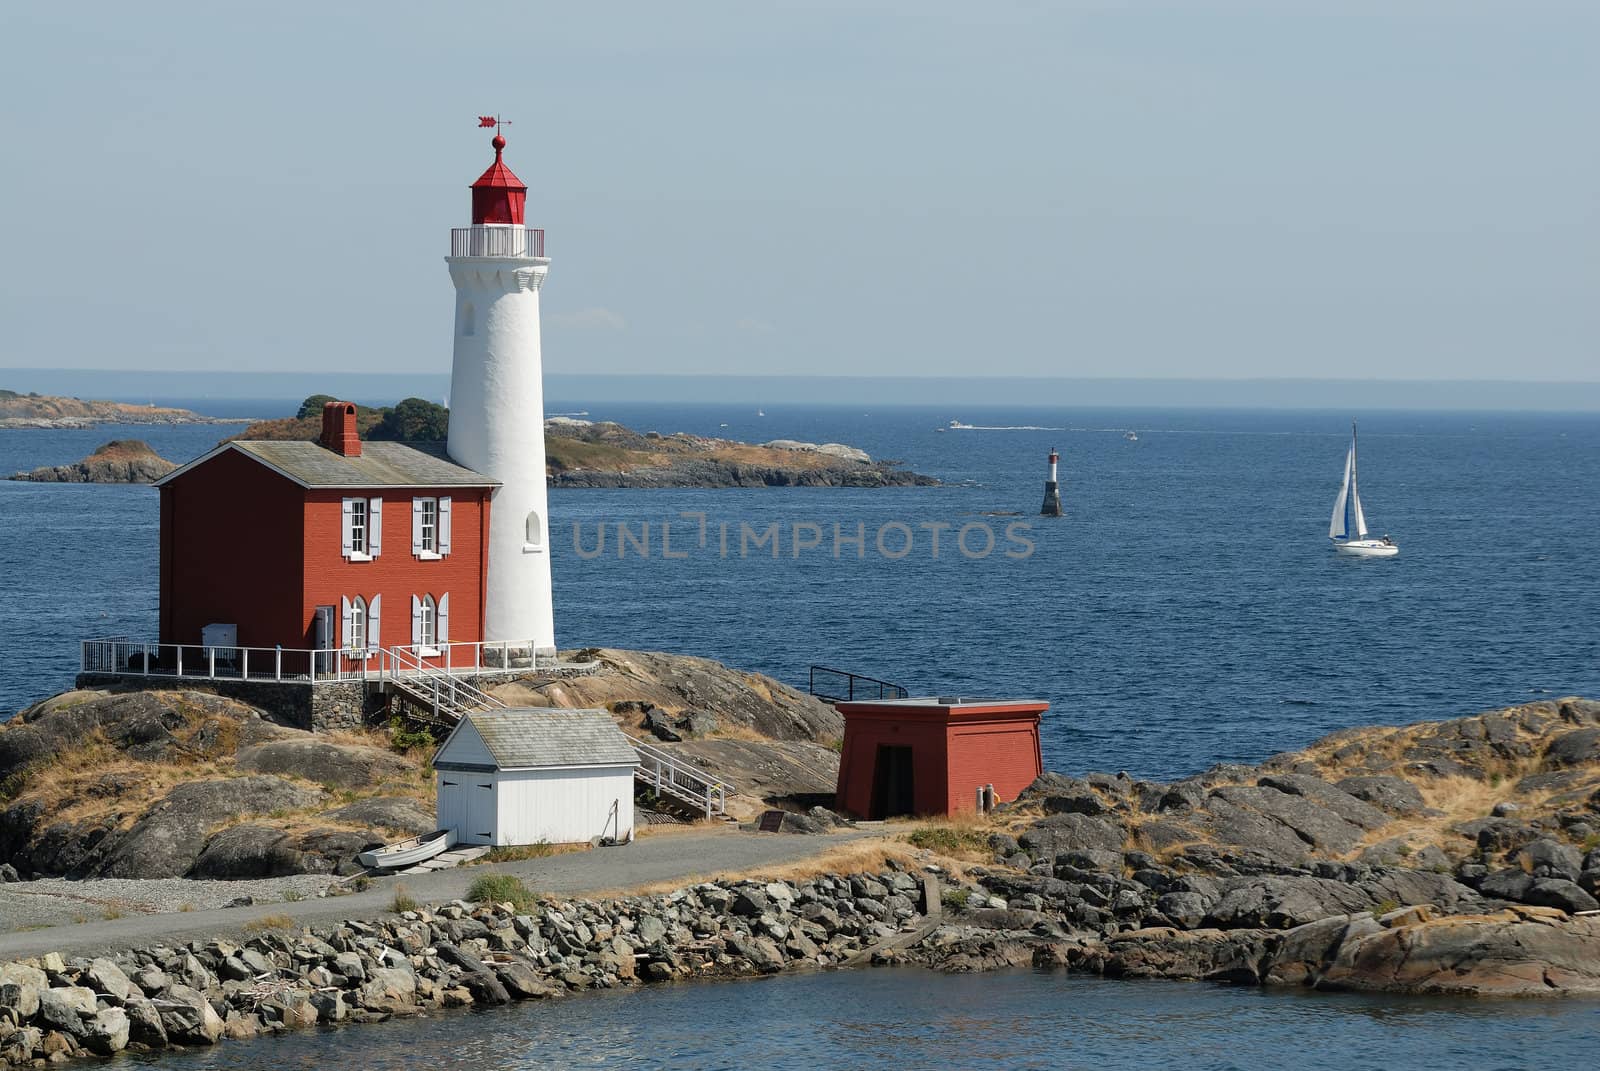 beautiful lighthouse on the rocks, Vancouver Island, Canada by alvov